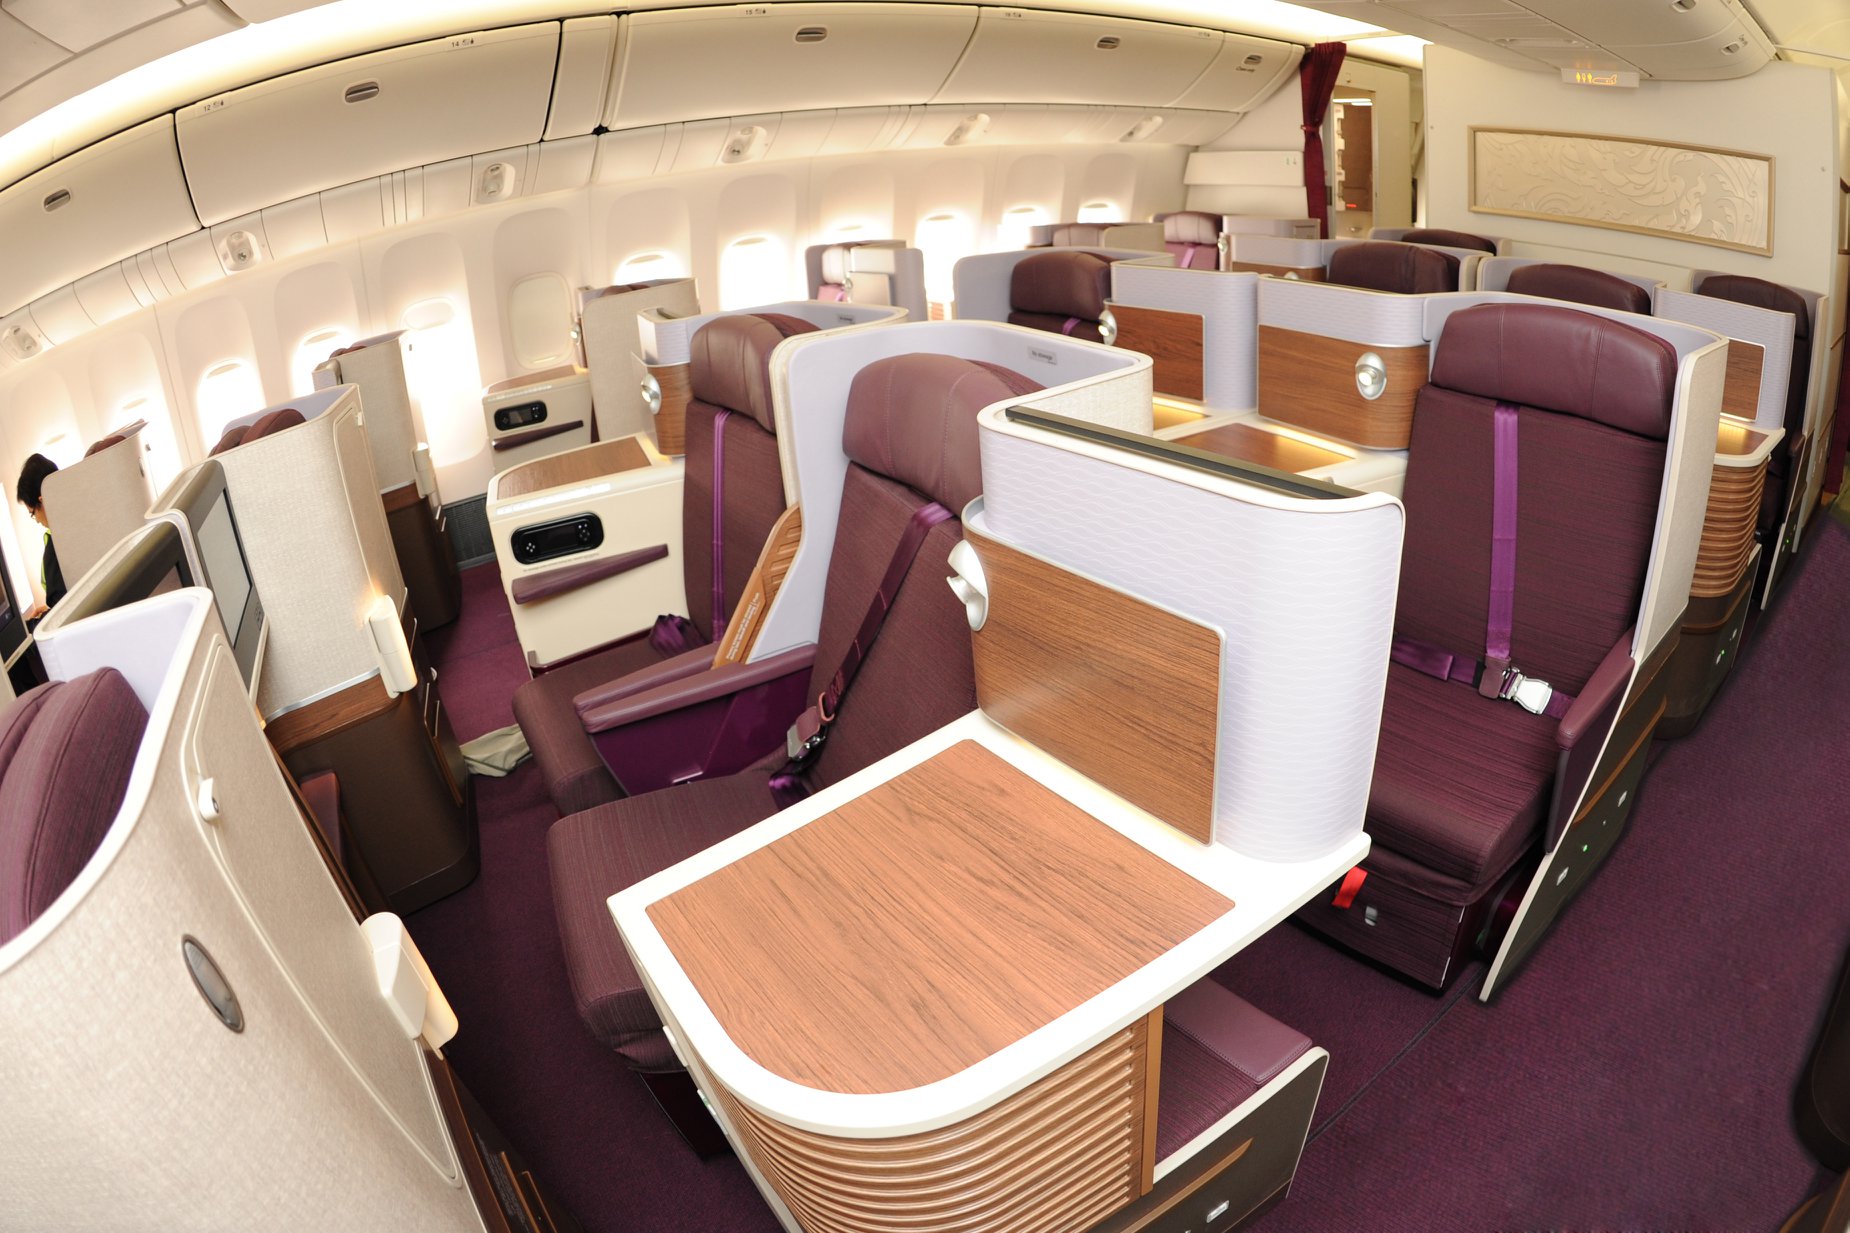 Thai Airways, one of Asia's leading airlines will up the ante on business and first class travel with the introduction of the Airbus A380 to its fleet.